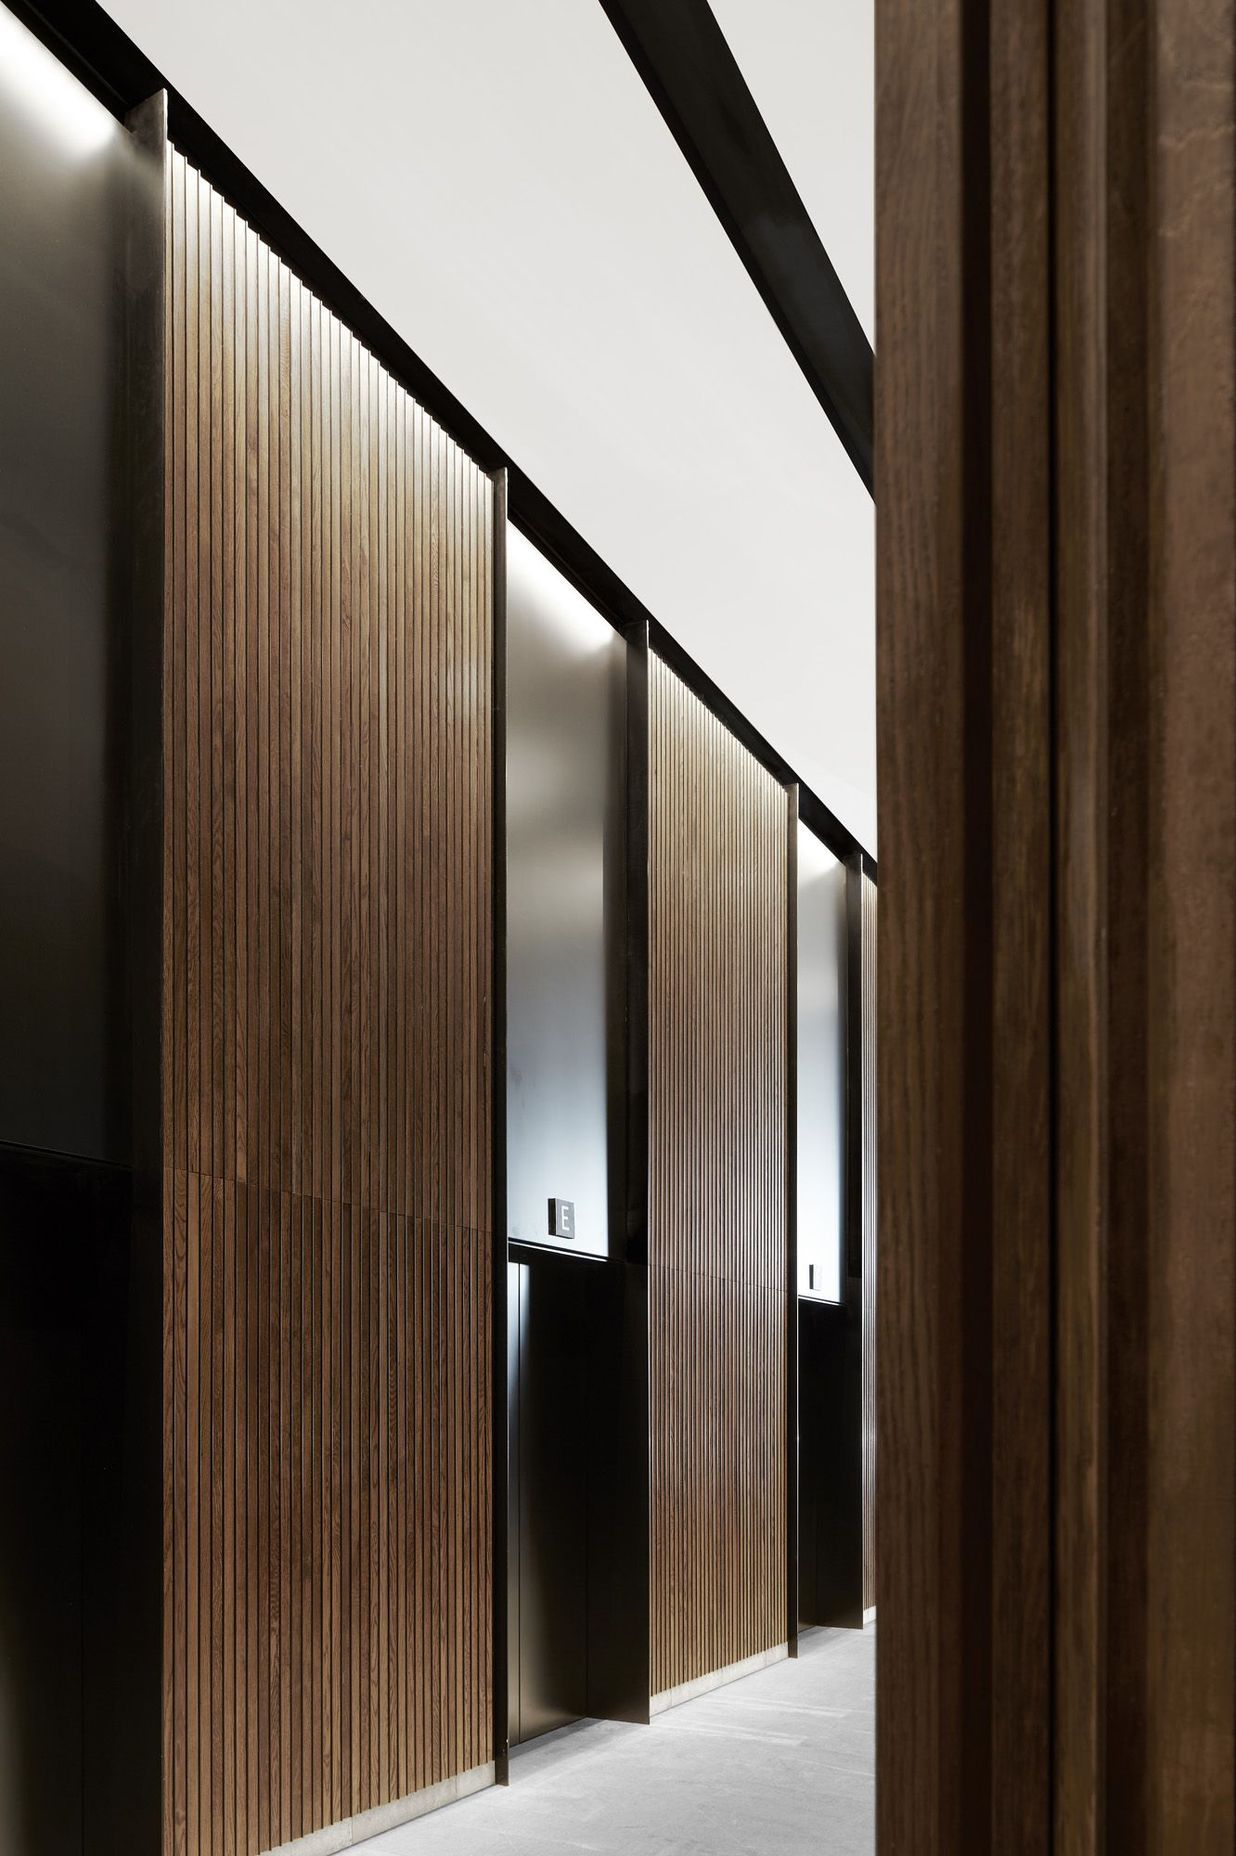 The circulation core is clad in timber panelling with black aluminium lifts.